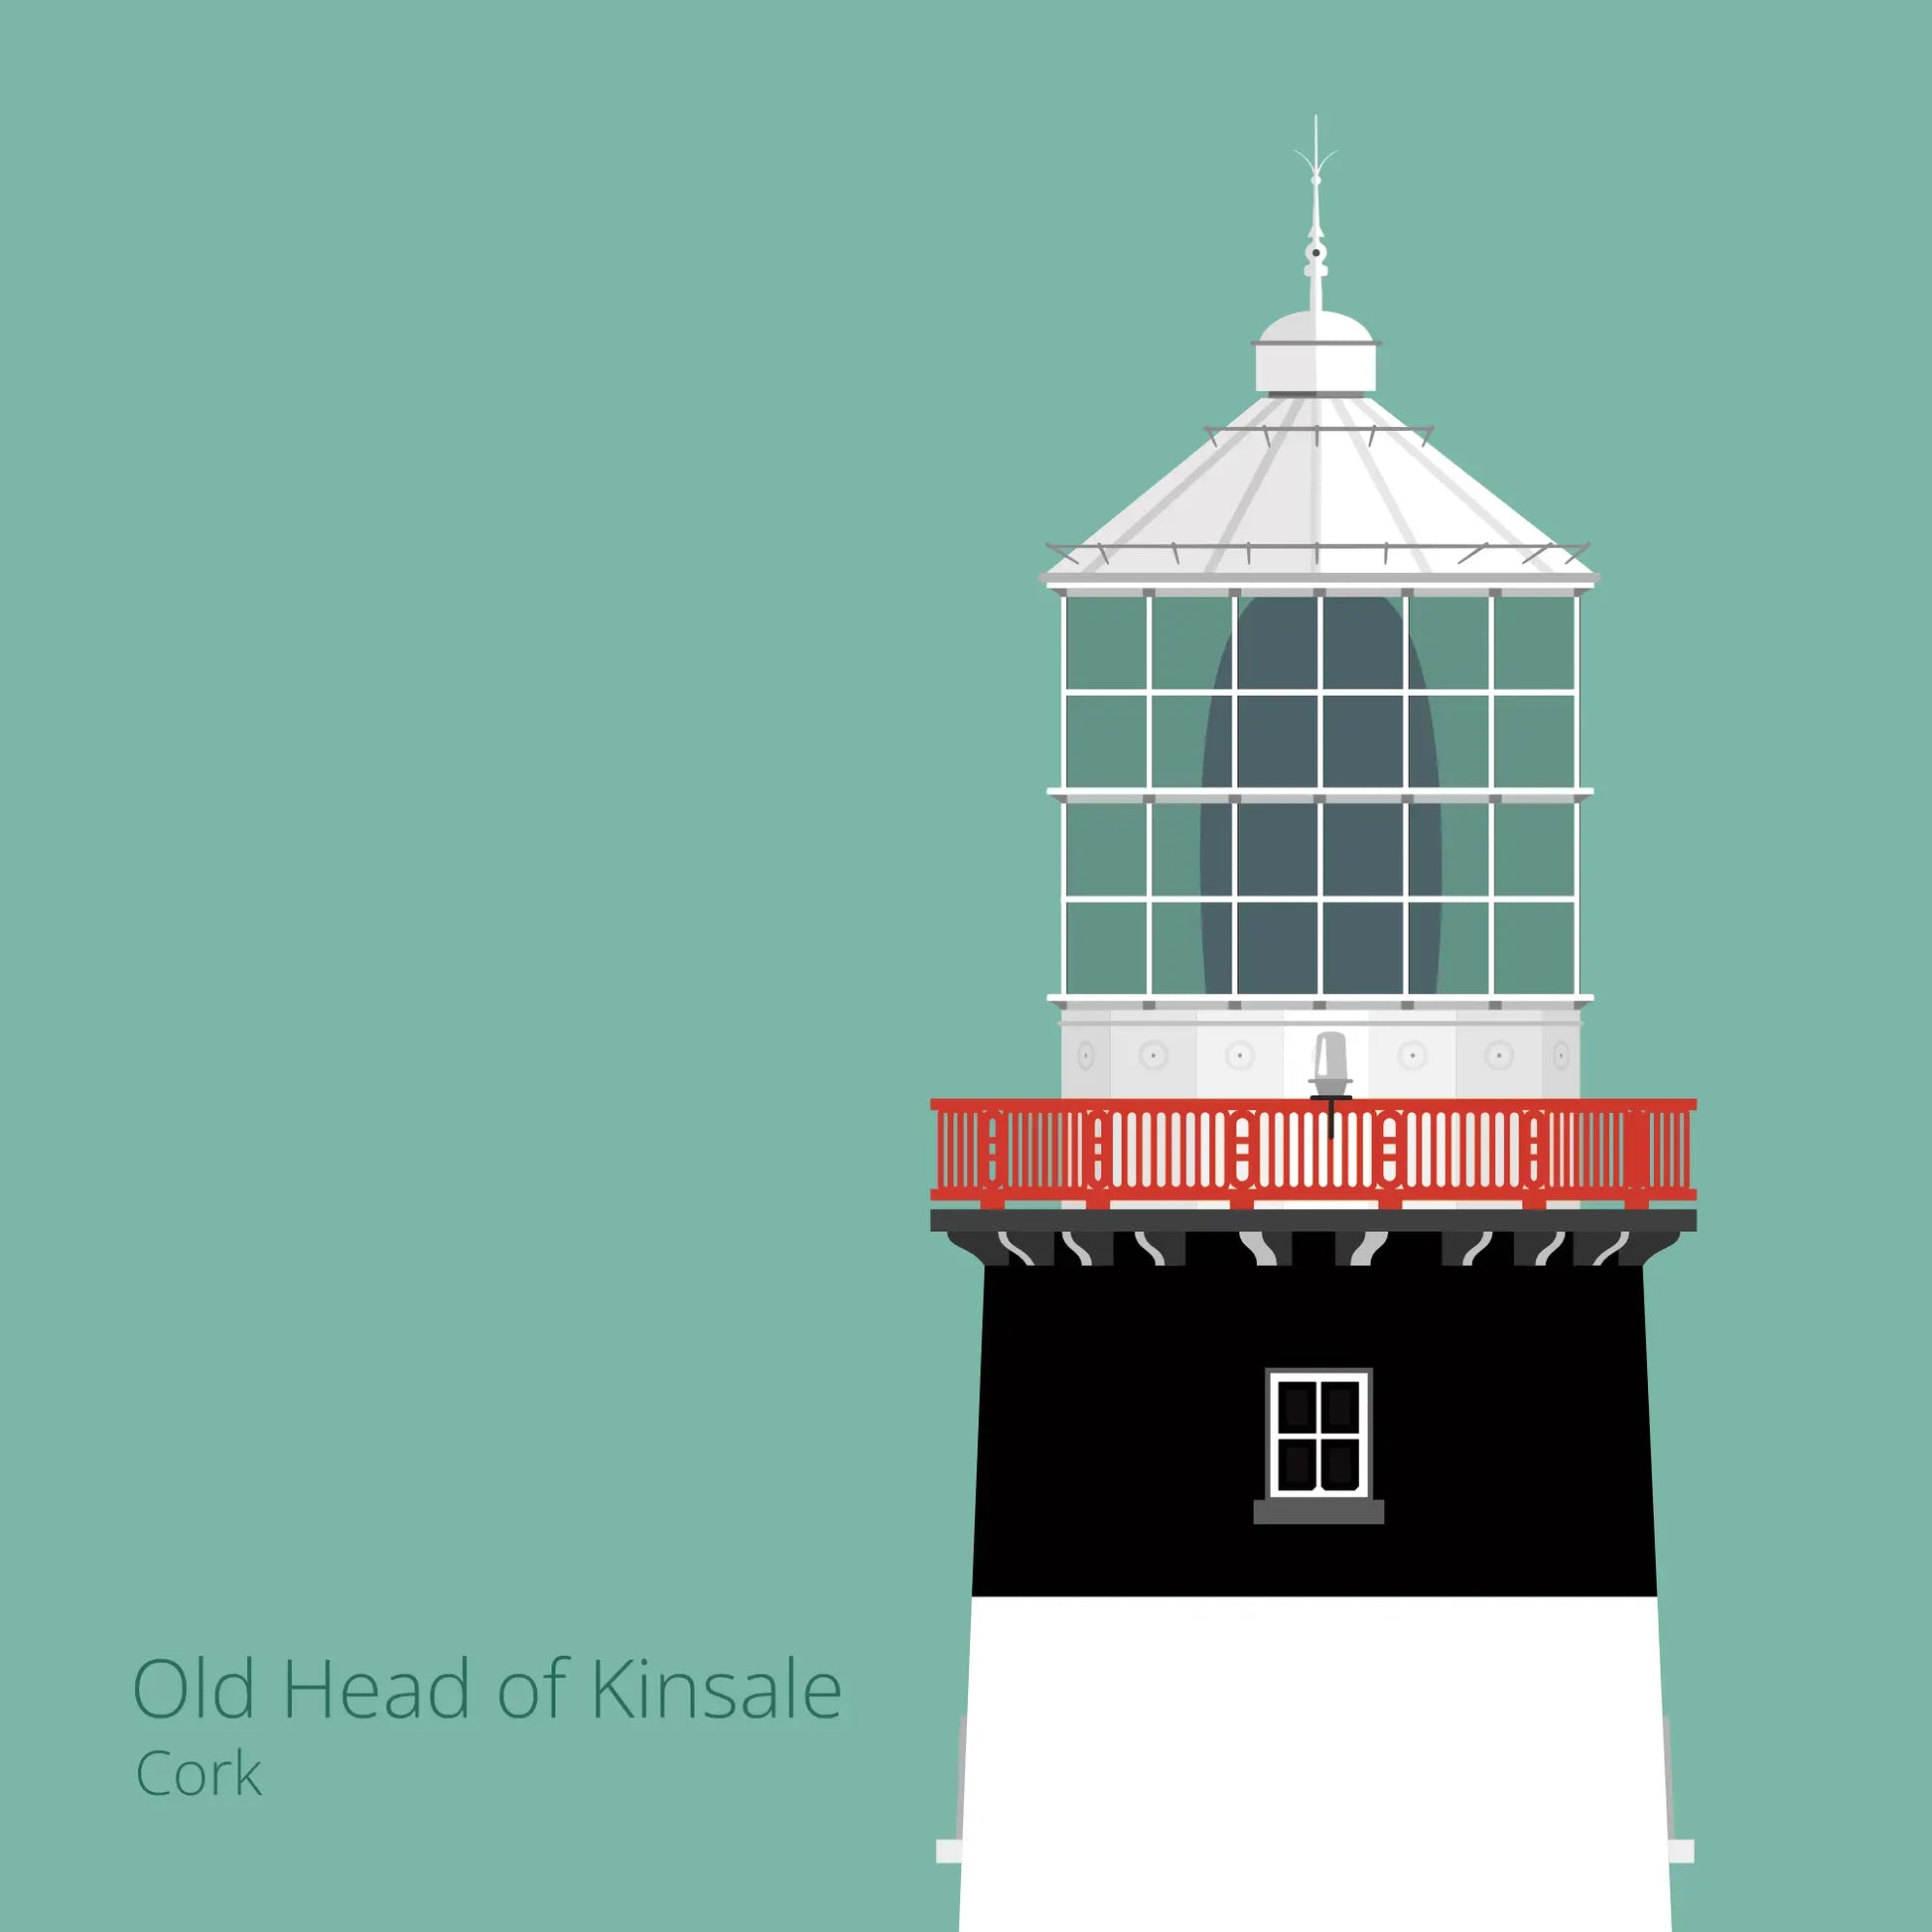 Illustration of Old Head of Kinsale lighthouse on an ocean green background